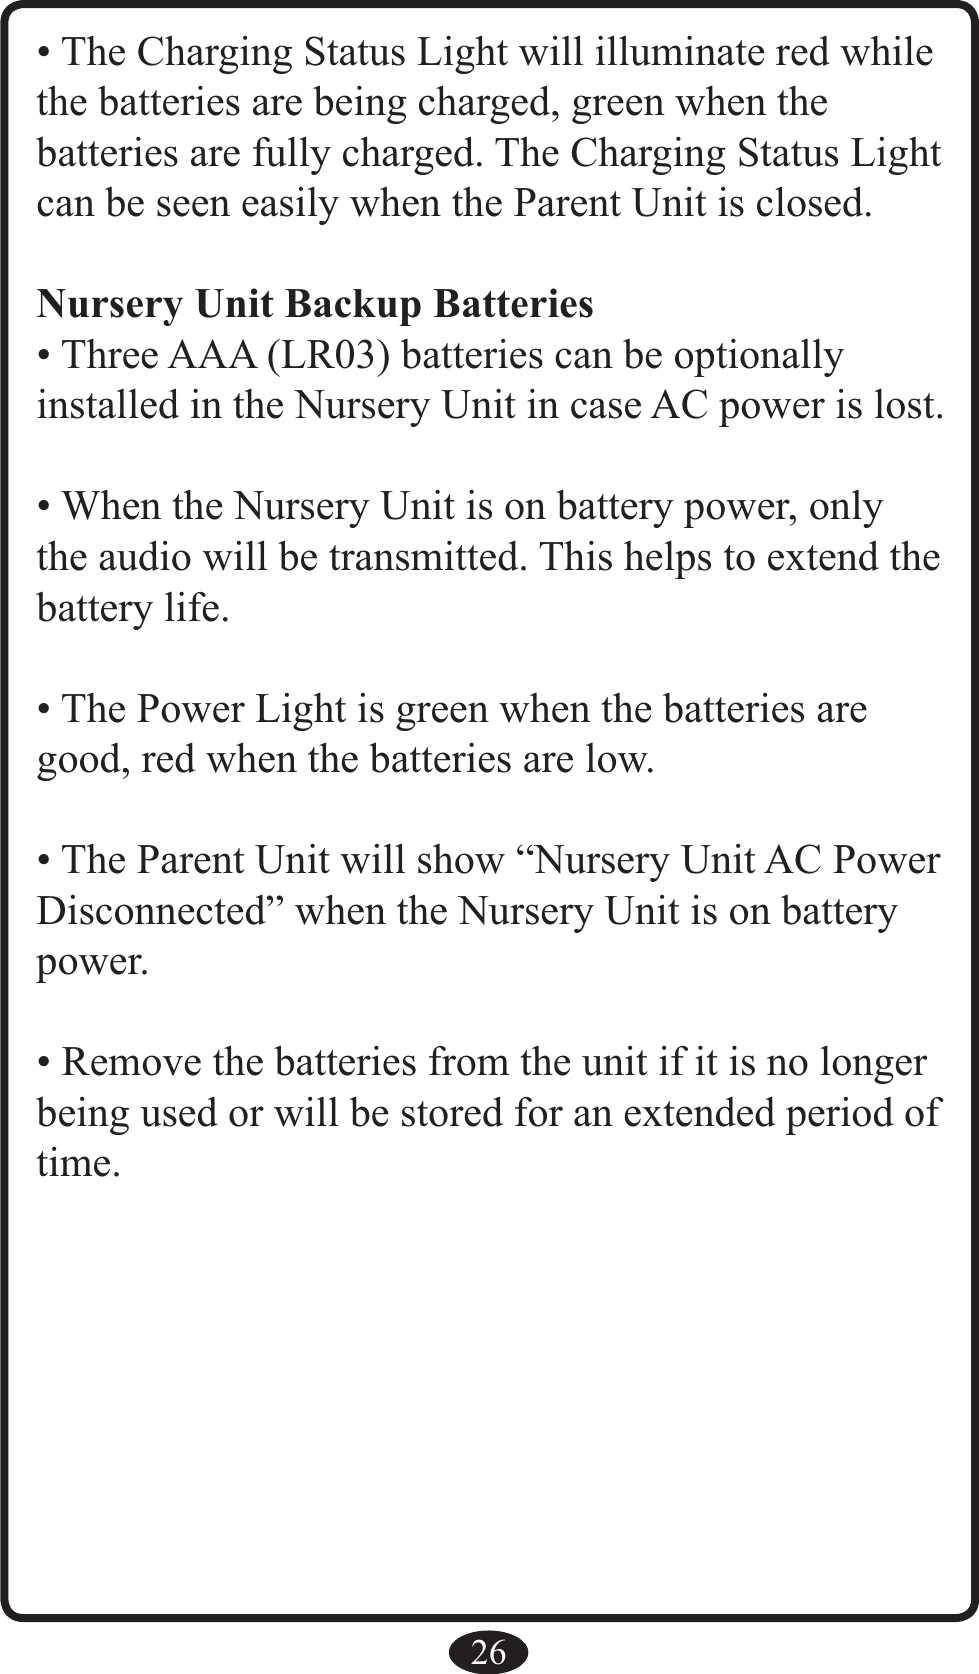 26• The Charging Status Light will illuminate red while the batteries are being charged, green when the  batteries are fully charged. The Charging Status Light can be seen easily when the Parent Unit is closed.Nursery Unit Backup Batteries• Three AAA (LR03) batteries can be optionally  installed in the Nursery Unit in case AC power is lost.• When the Nursery Unit is on battery power, only the audio will be transmitted. This helps to extend the battery life.• The Power Light is green when the batteries are good, red when the batteries are low.• The Parent Unit will show “Nursery Unit AC Power Disconnected” when the Nursery Unit is on battery power.• Remove the batteries from the unit if it is no longer being used or will be stored for an extended period of time.